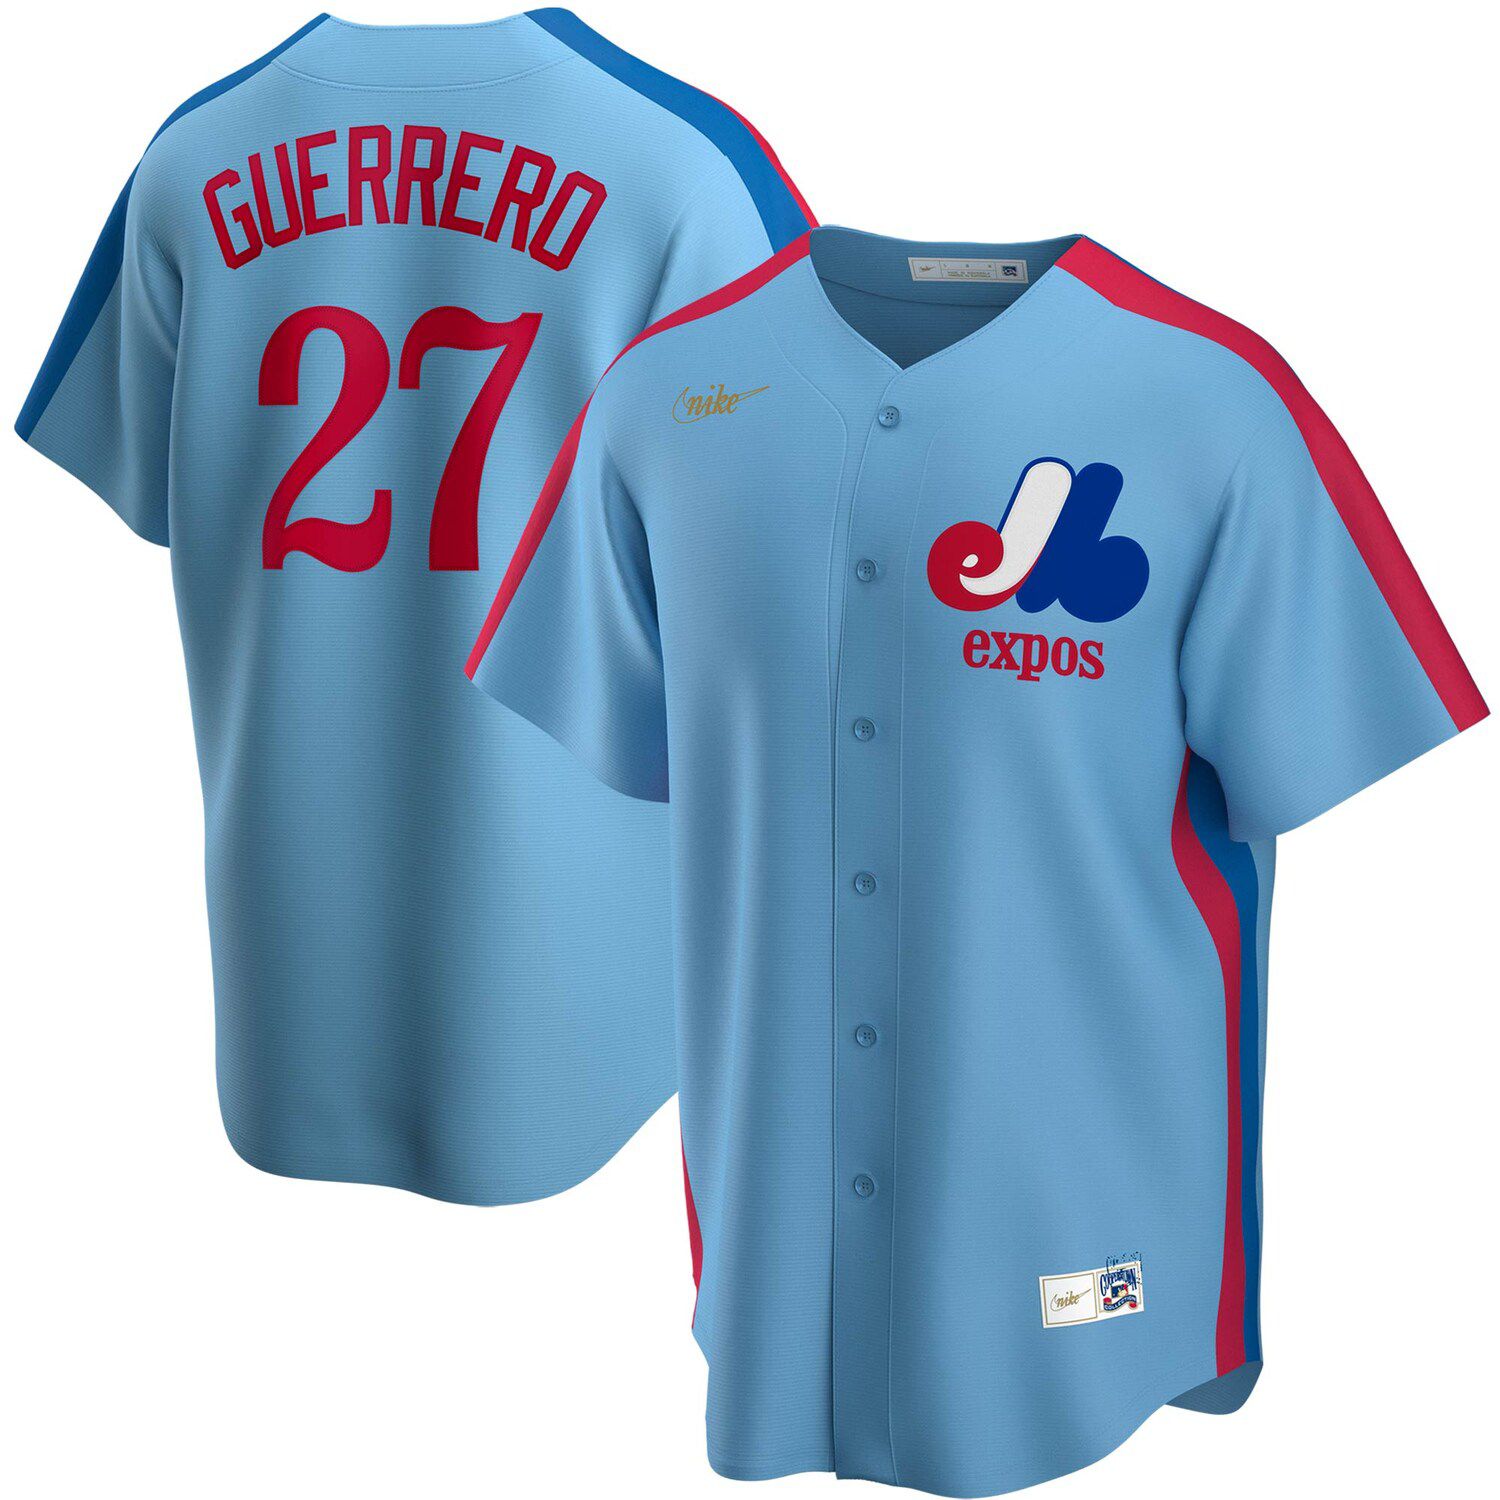 Men's Mitchell & Ness Pedro Martinez Gray Montreal Expos Cooperstown Collection Authentic Jersey